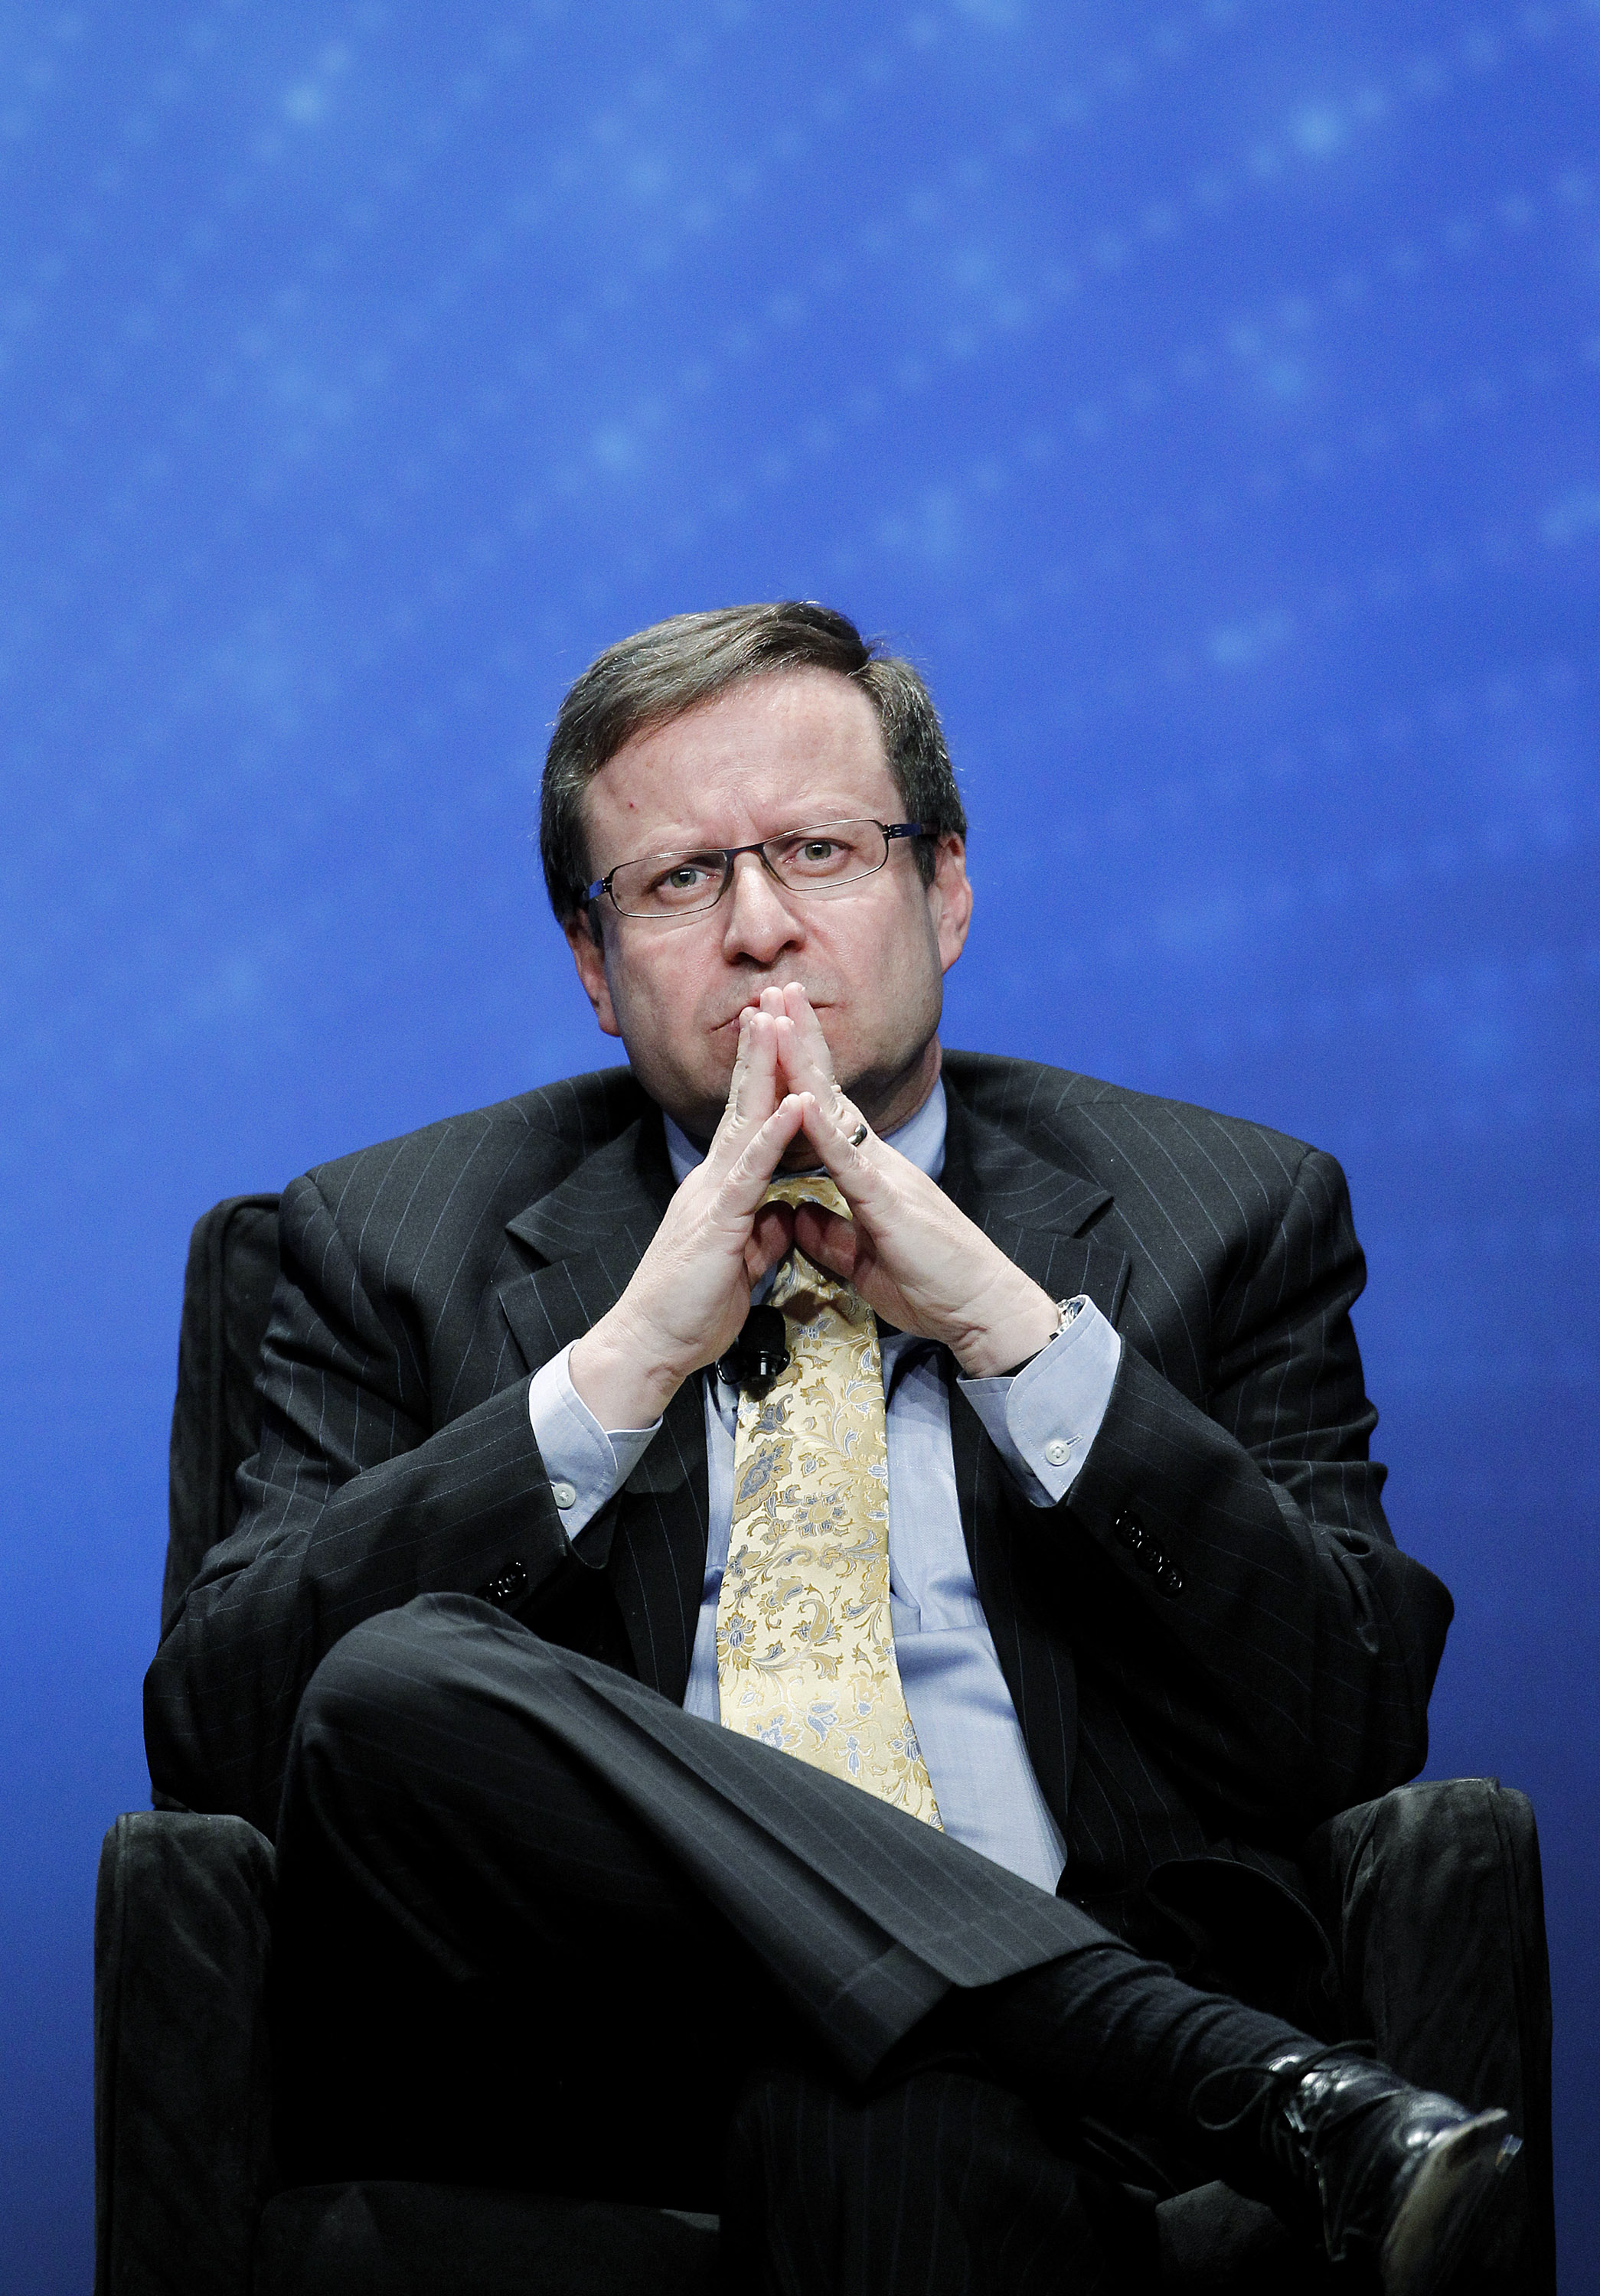 Steven Koonin, under secretary for science at the U.S. Department of Energy, listens during the 2011 CERAWEEK conference in Houston on March 11, 2011. 